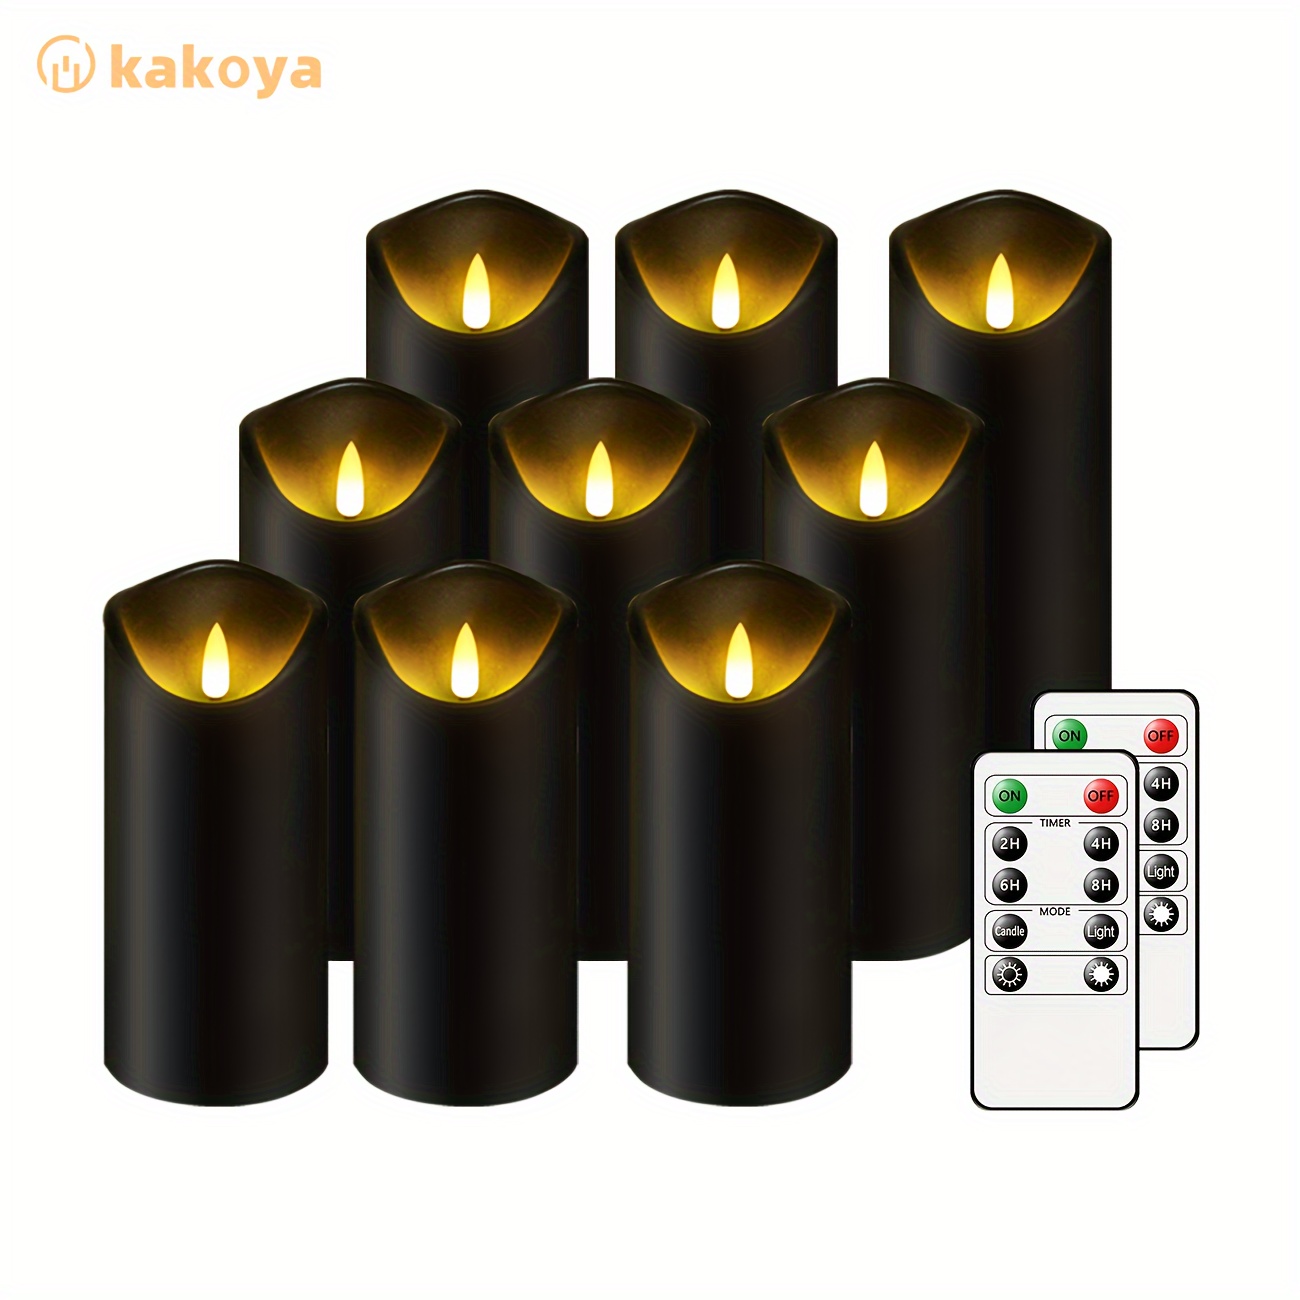 

9-pack Kakoya Flameless Led Pillar Candles, Battery-operated Acrylic Candles With Remote And Timer, Flickering Non-flame Candles, 2.3 X 4-5-6 Inch Set, Black Plastic, For Home Decor, Weddings, Parties